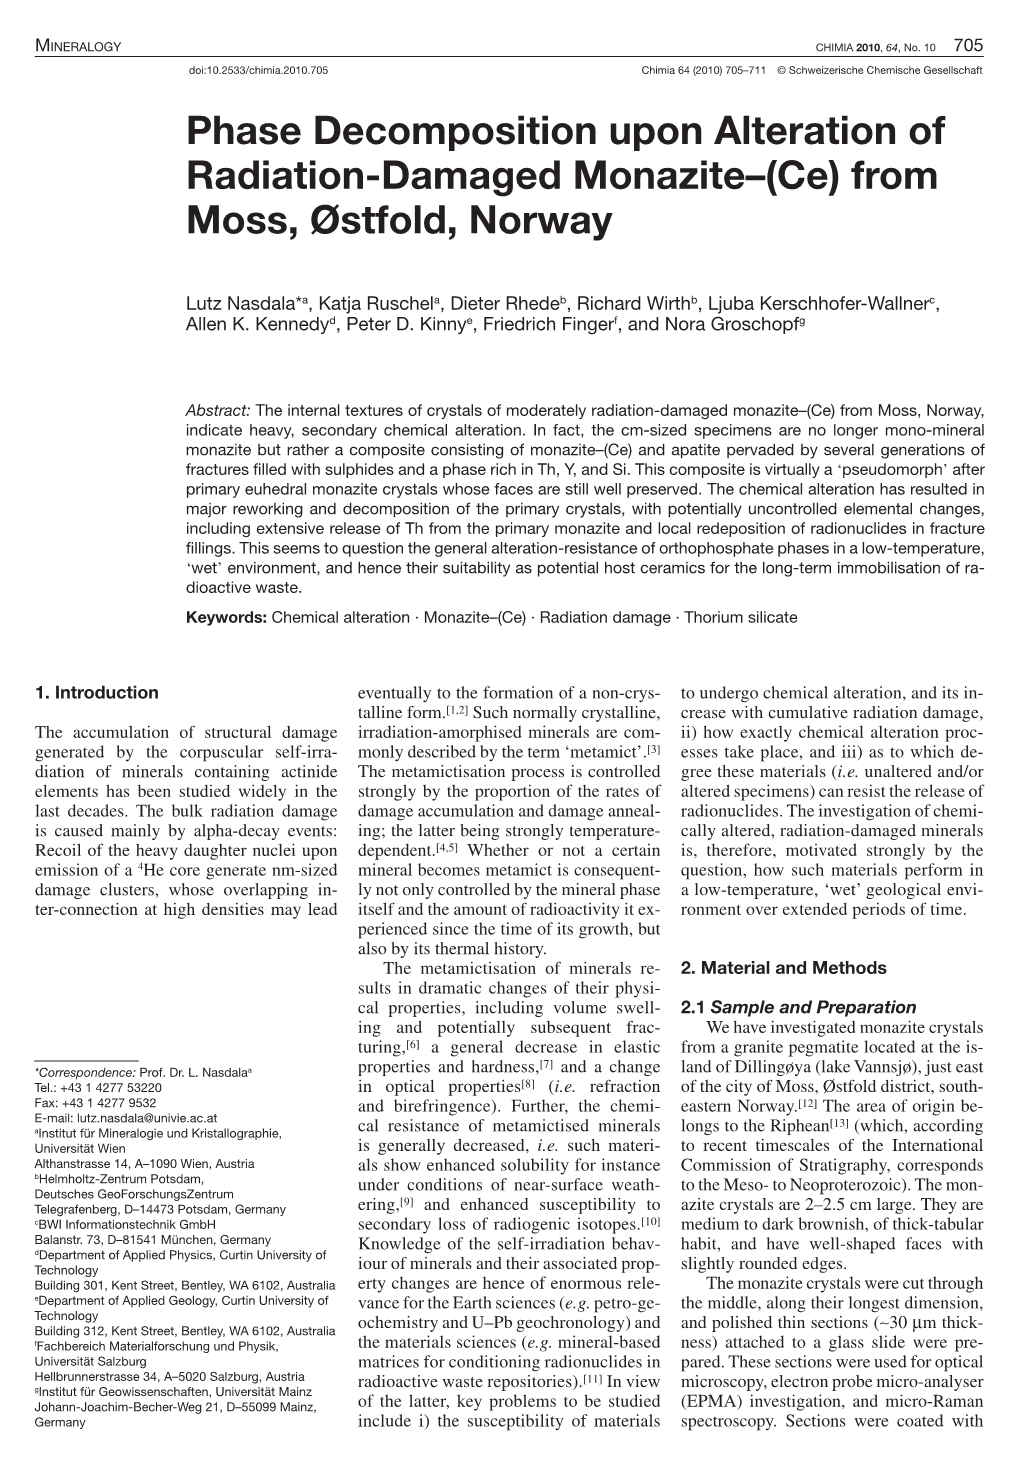 Phase Decomposition Upon Alteration of Radiation-Damaged Monazite–(Ce) from Moss, Østfold, Norway